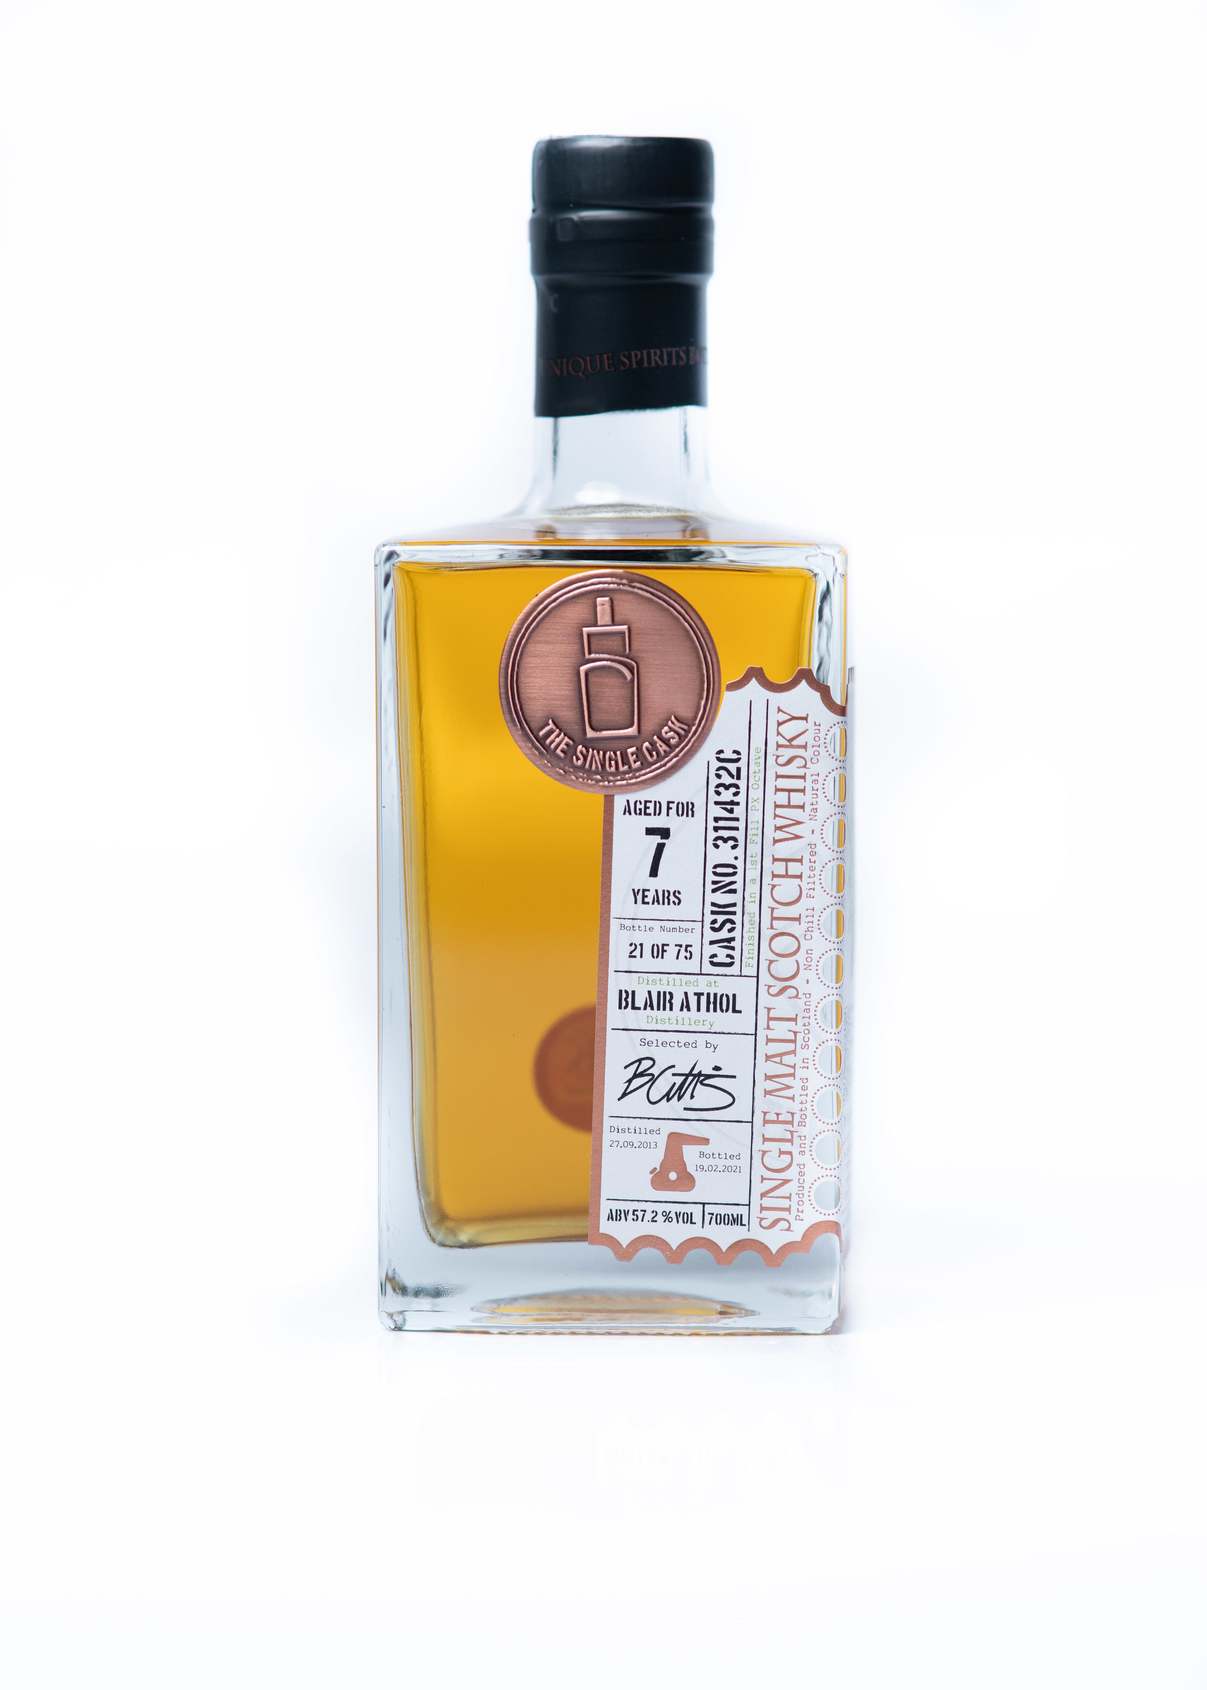 Blair Athol 7 years old The Single Cask Independent bottler